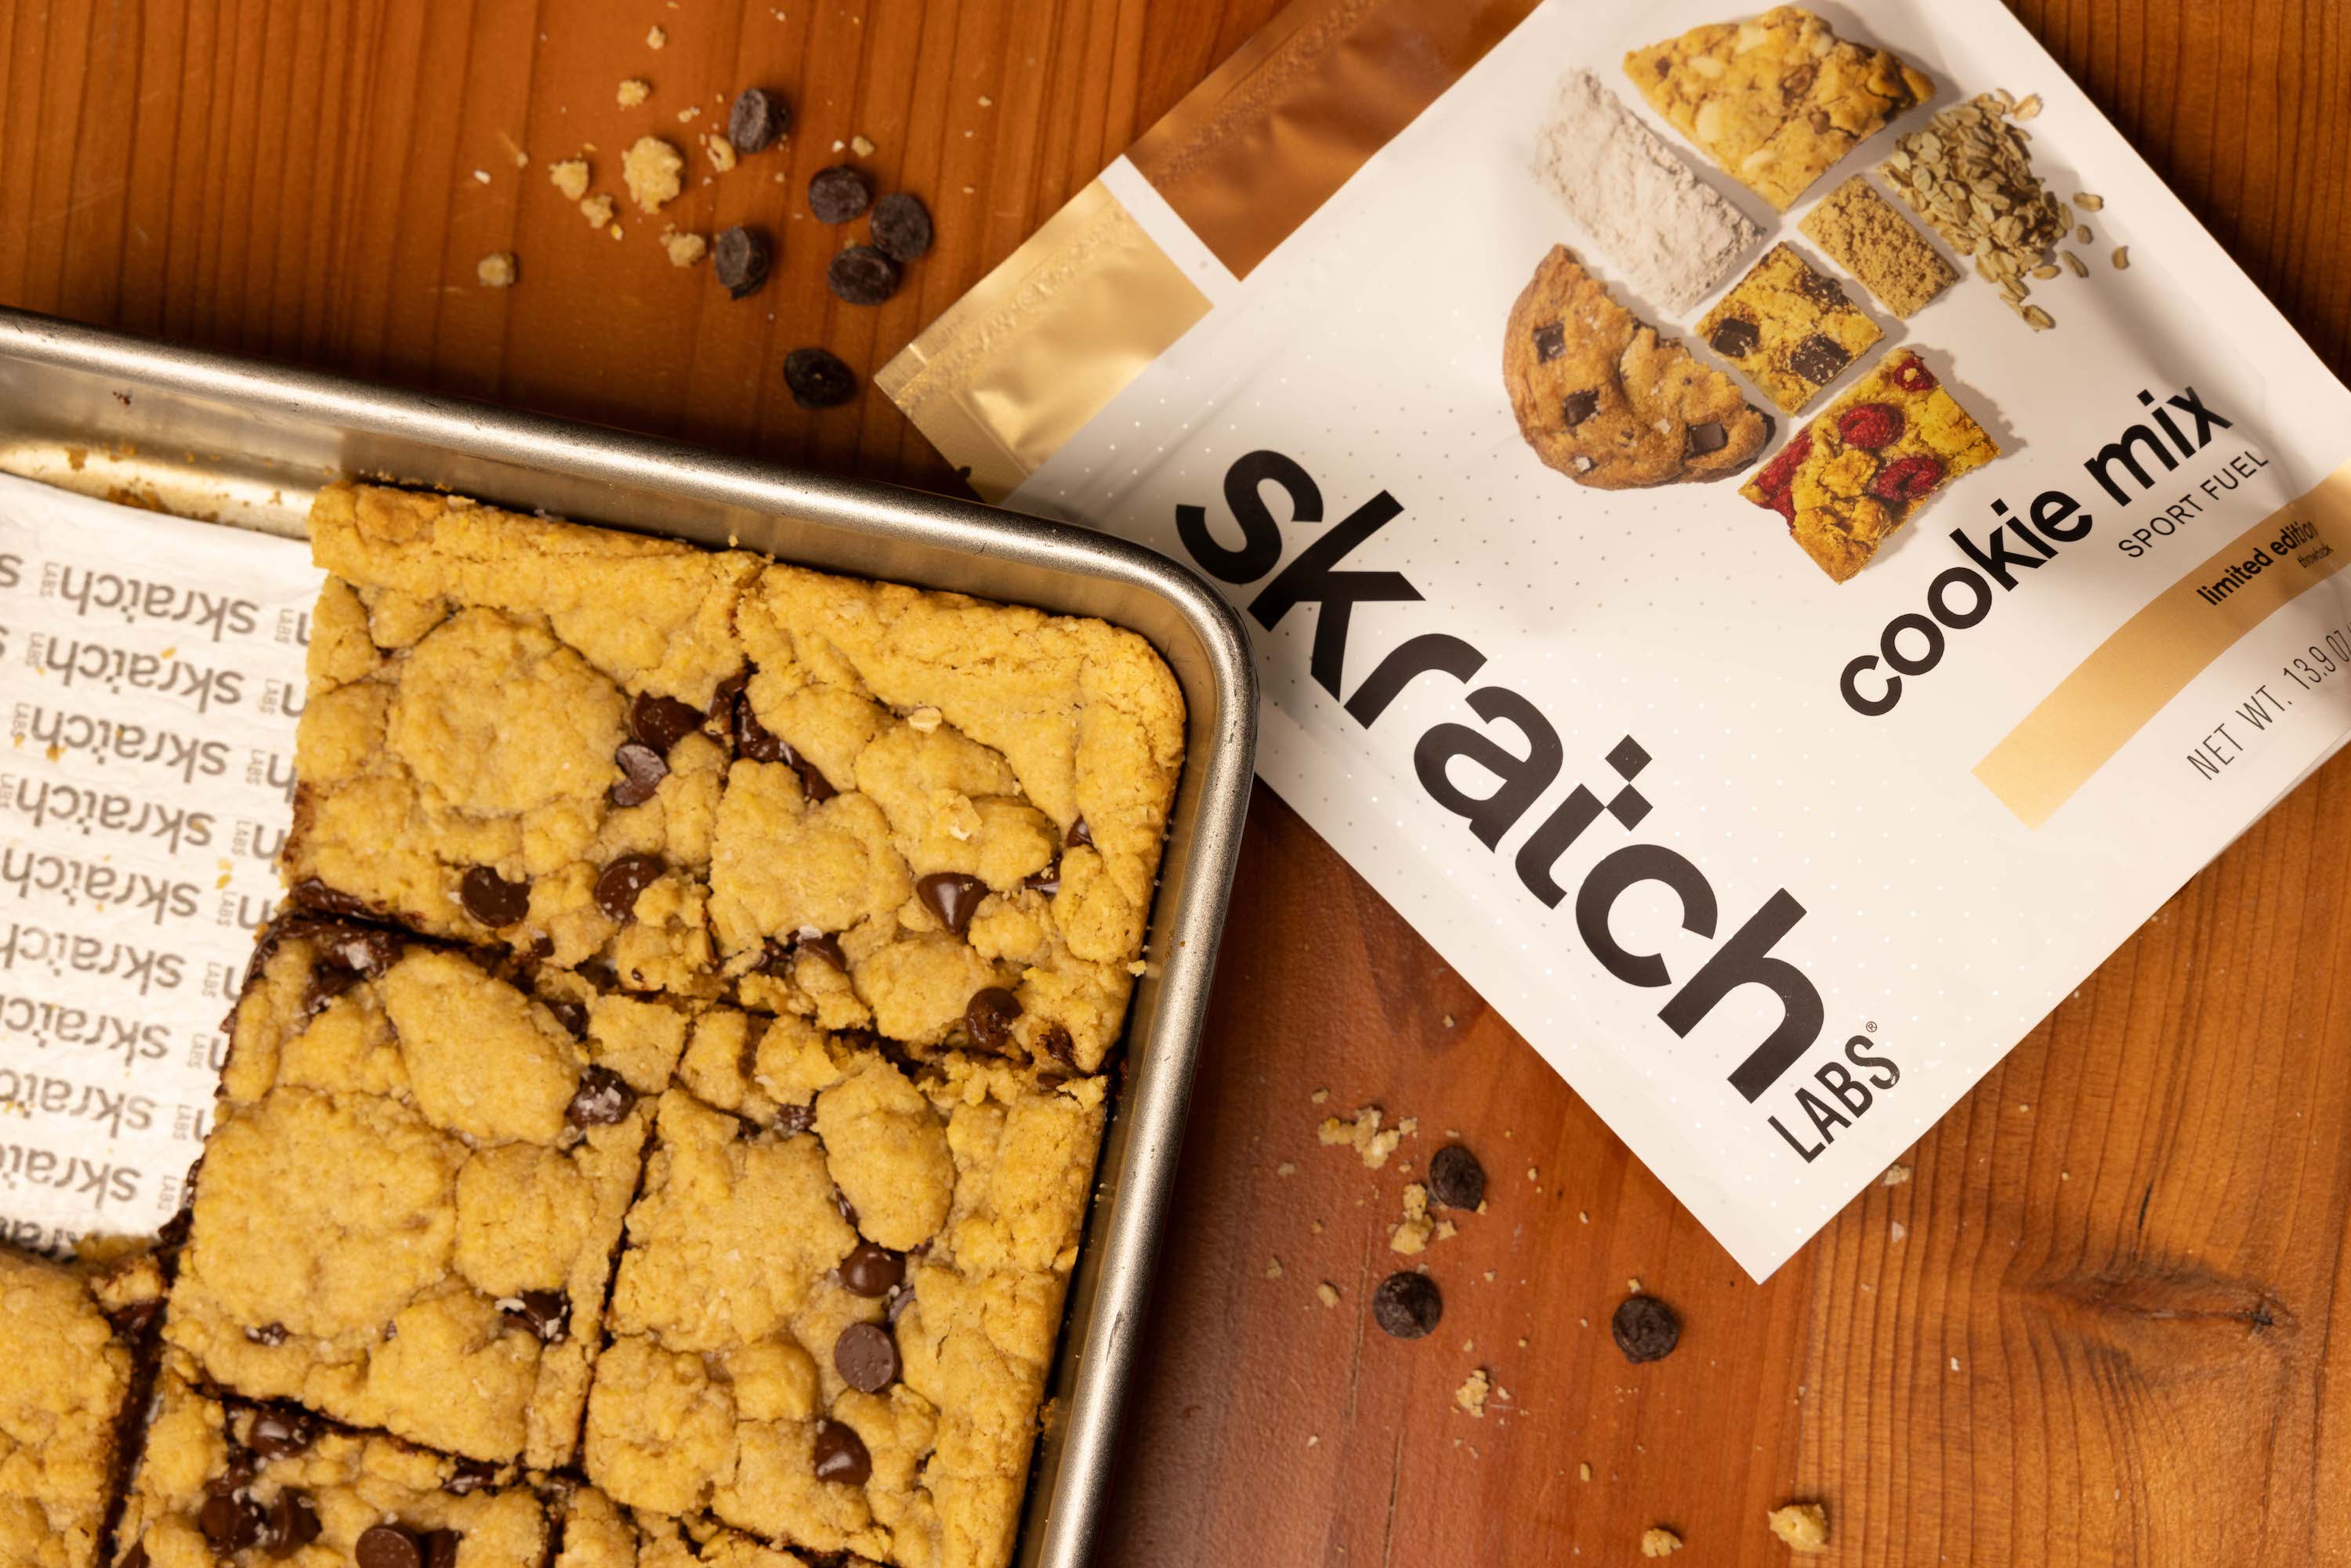 How Simple is Skratch Cookie Mix?